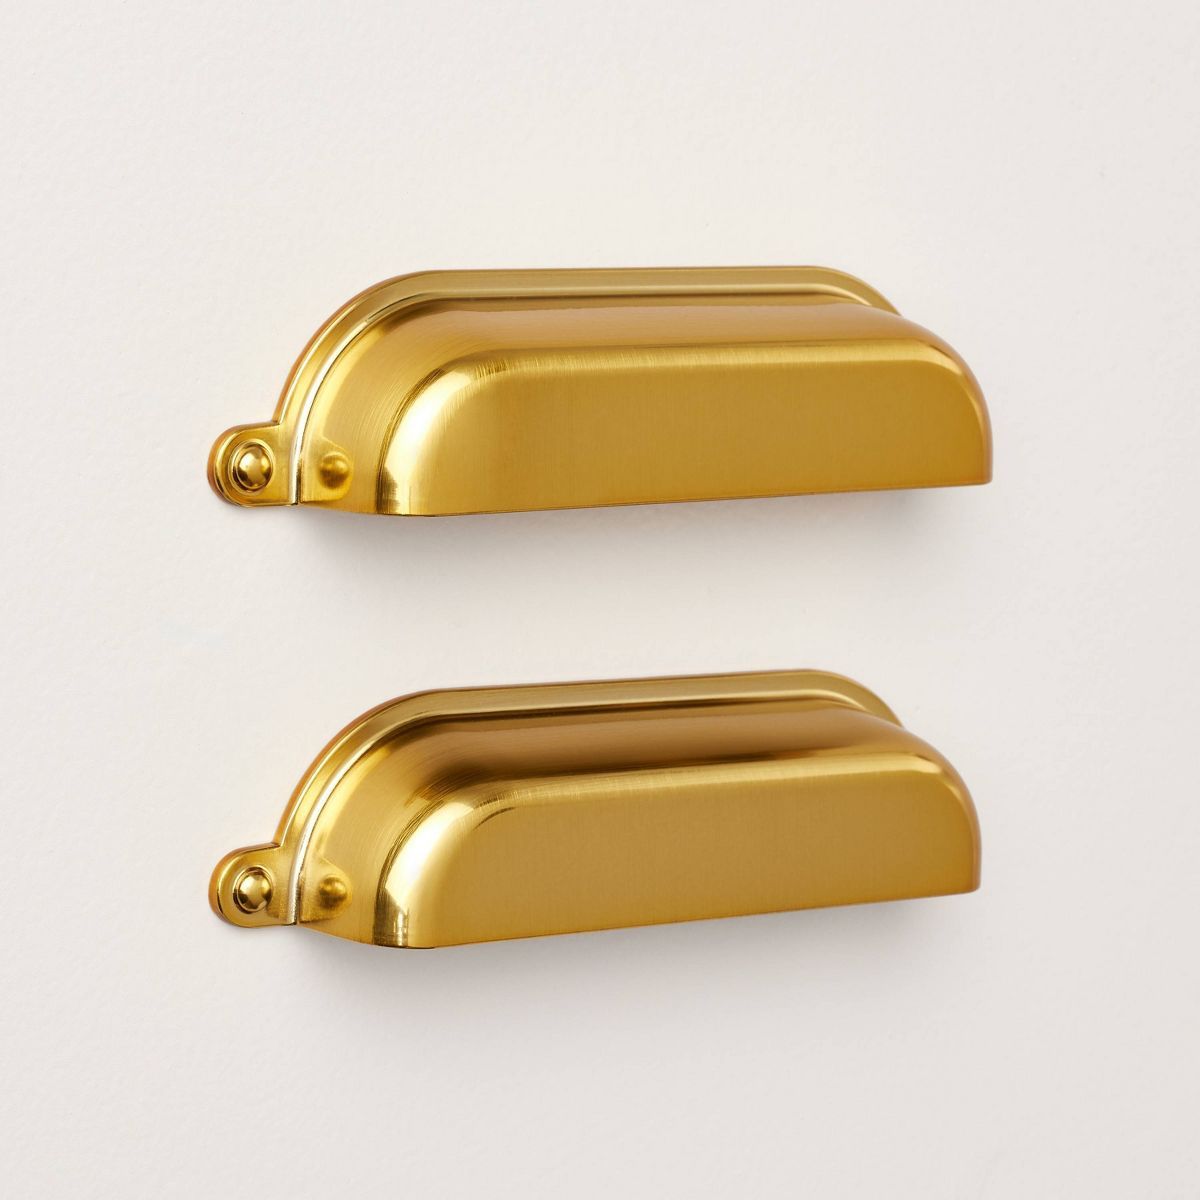 Vintage Library Drawer Bin Pulls (Set of 2) - Hearth & Hand™ with Magnolia | Target